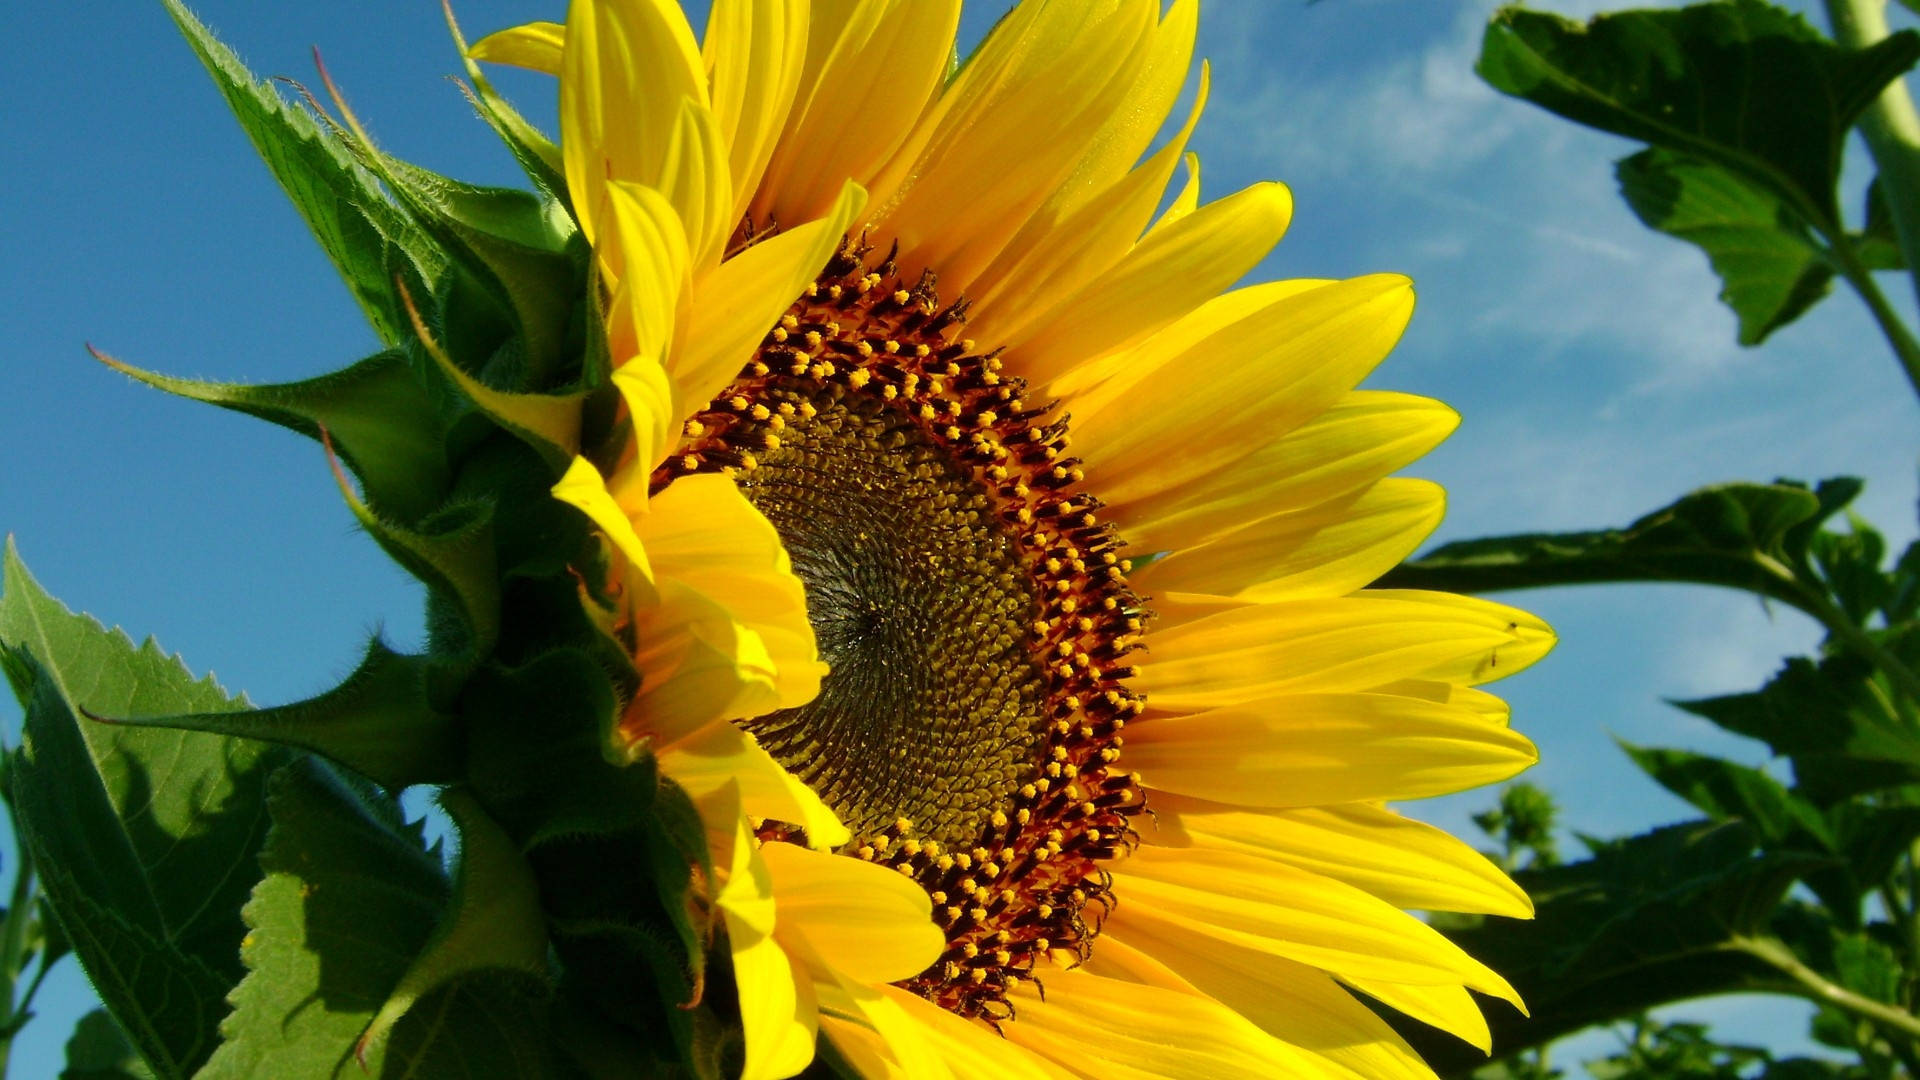 Start the day with brightness and beauty, the sunflower on your desktop background. Wallpaper